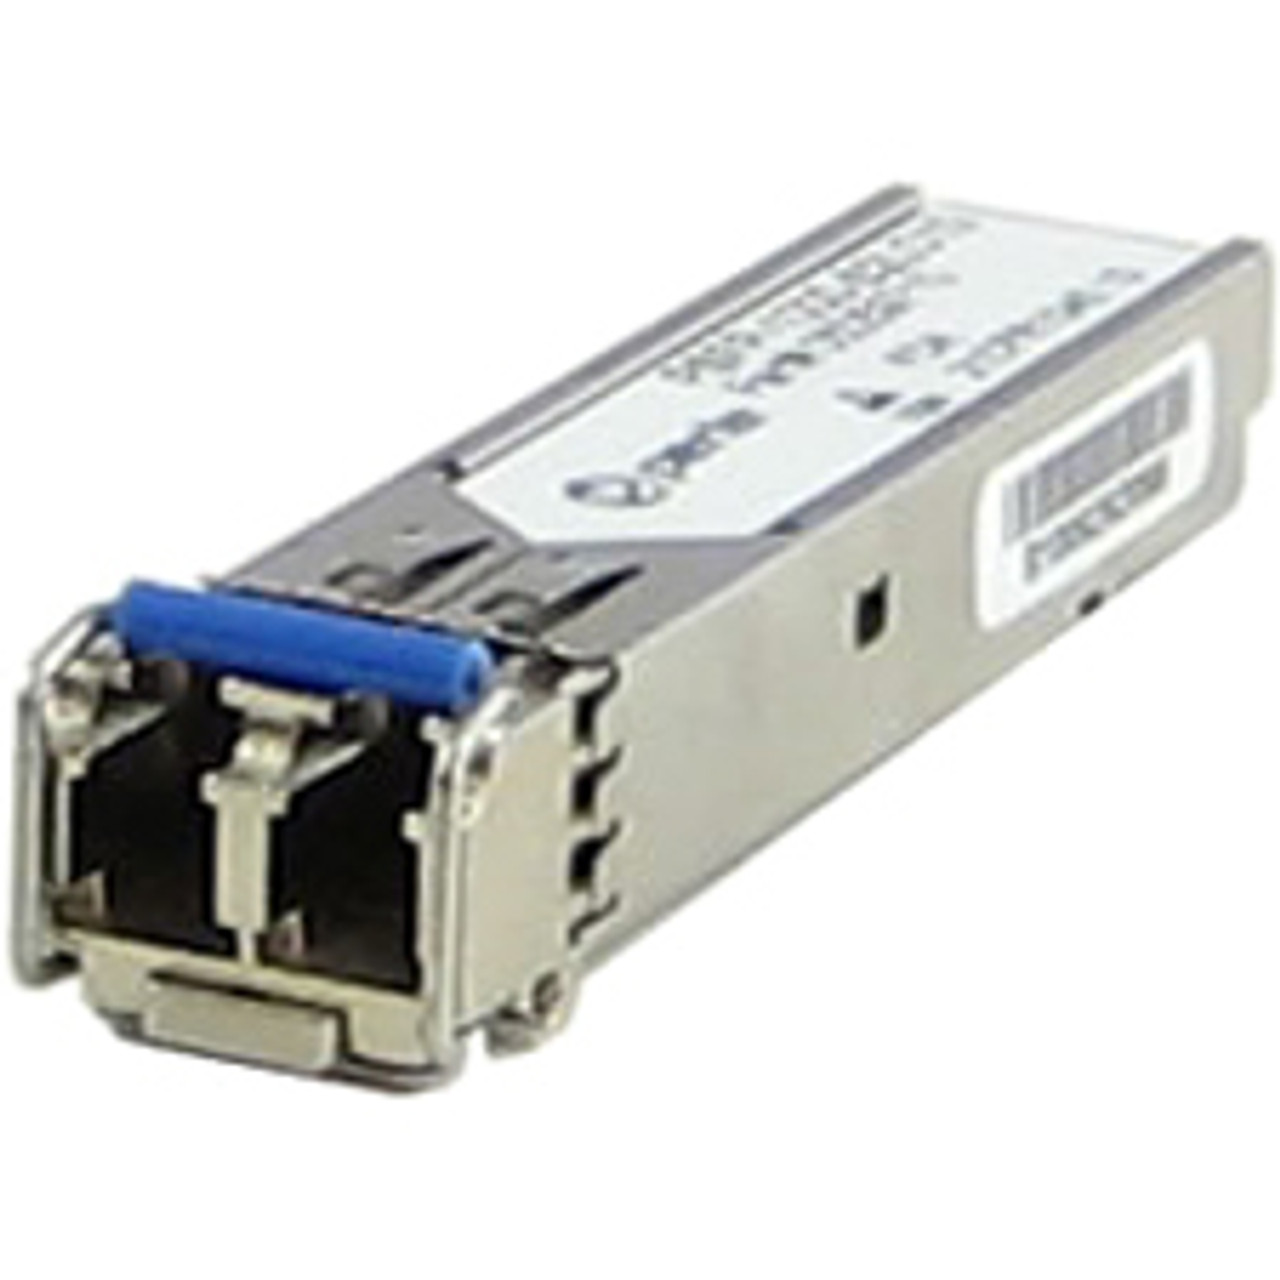 05059680 Perle Psfp-10gd-S2lc10 Optical 10Gbps 10GBase-LR 1310nm Single Duplex LC Connector SFP+ Transceiver Module with Dom